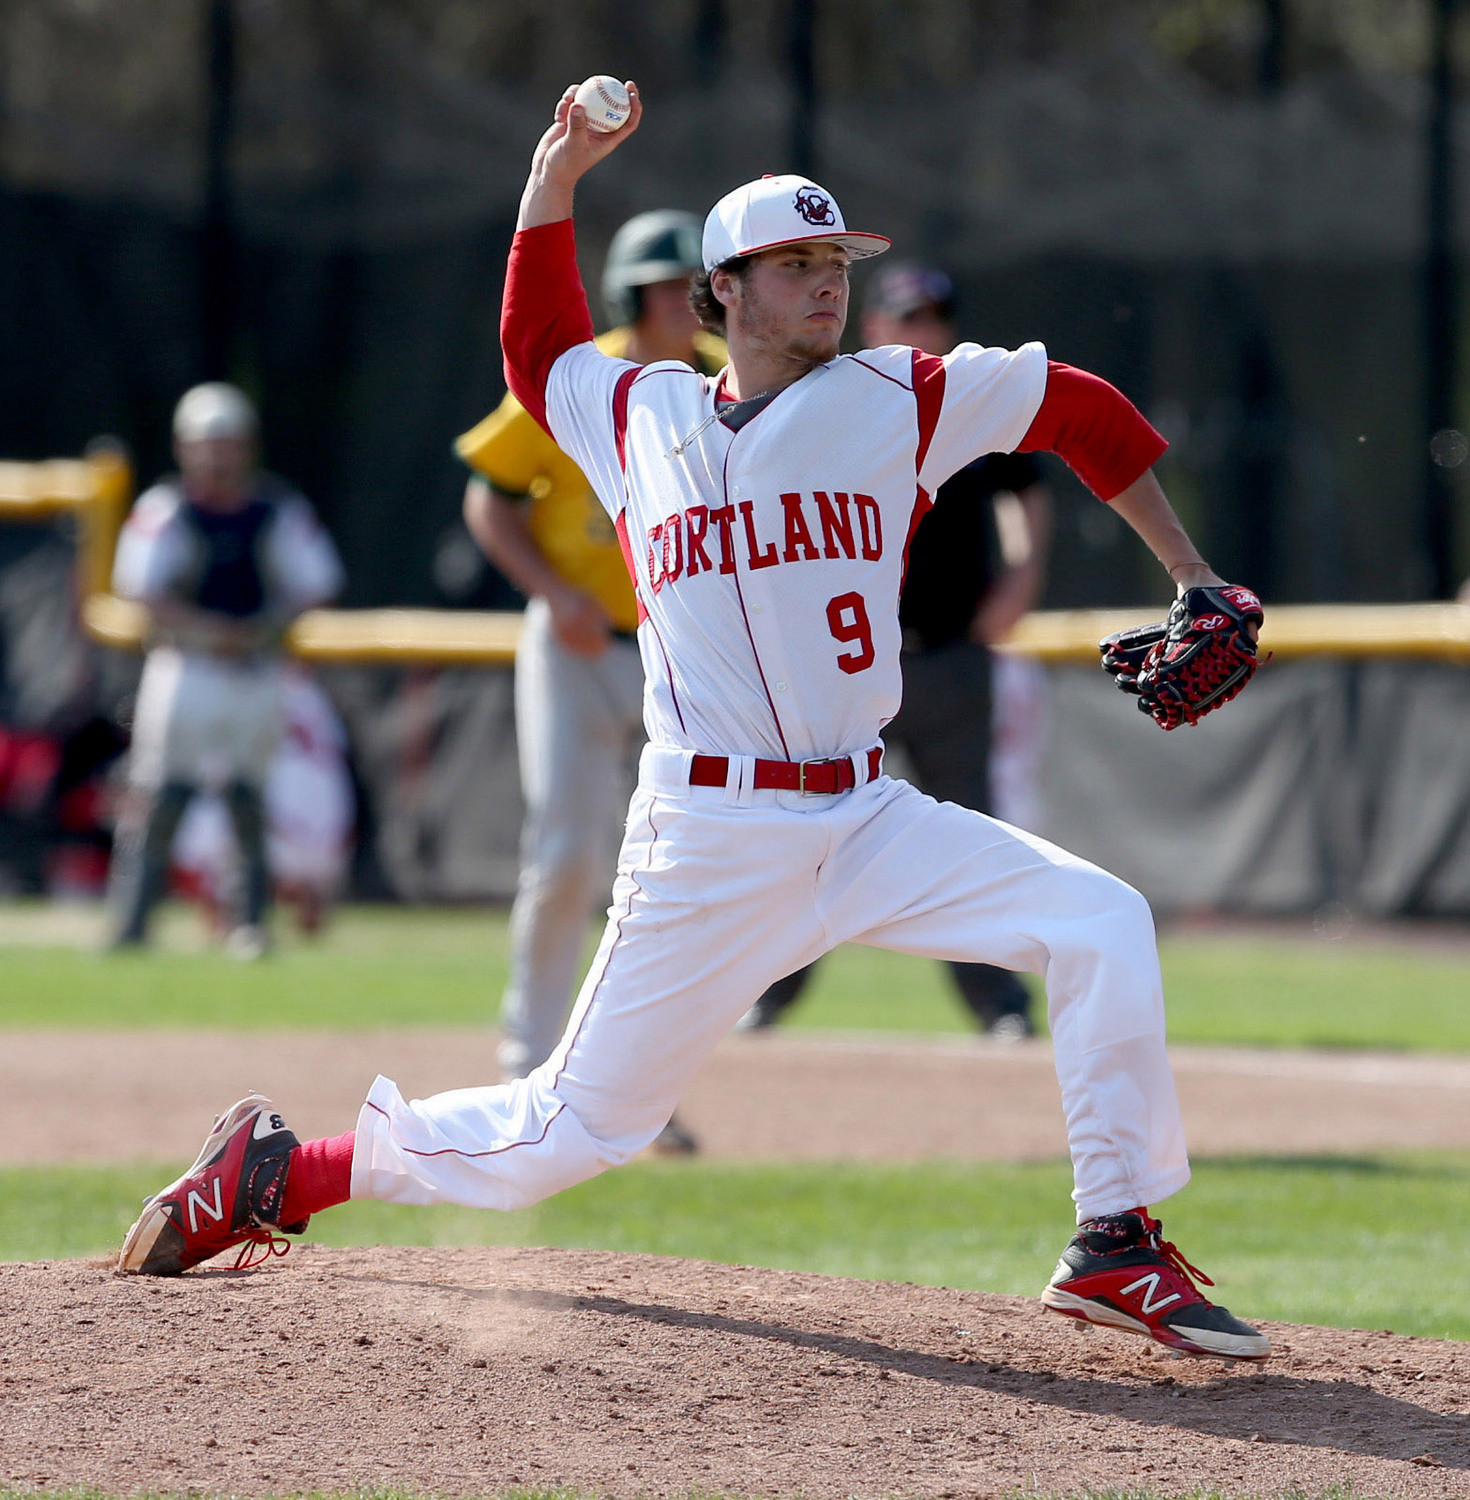 Alex Weingarten, a former standout at Lynbrook High School, helped lead Cortland to the NCAA Division III World Series.